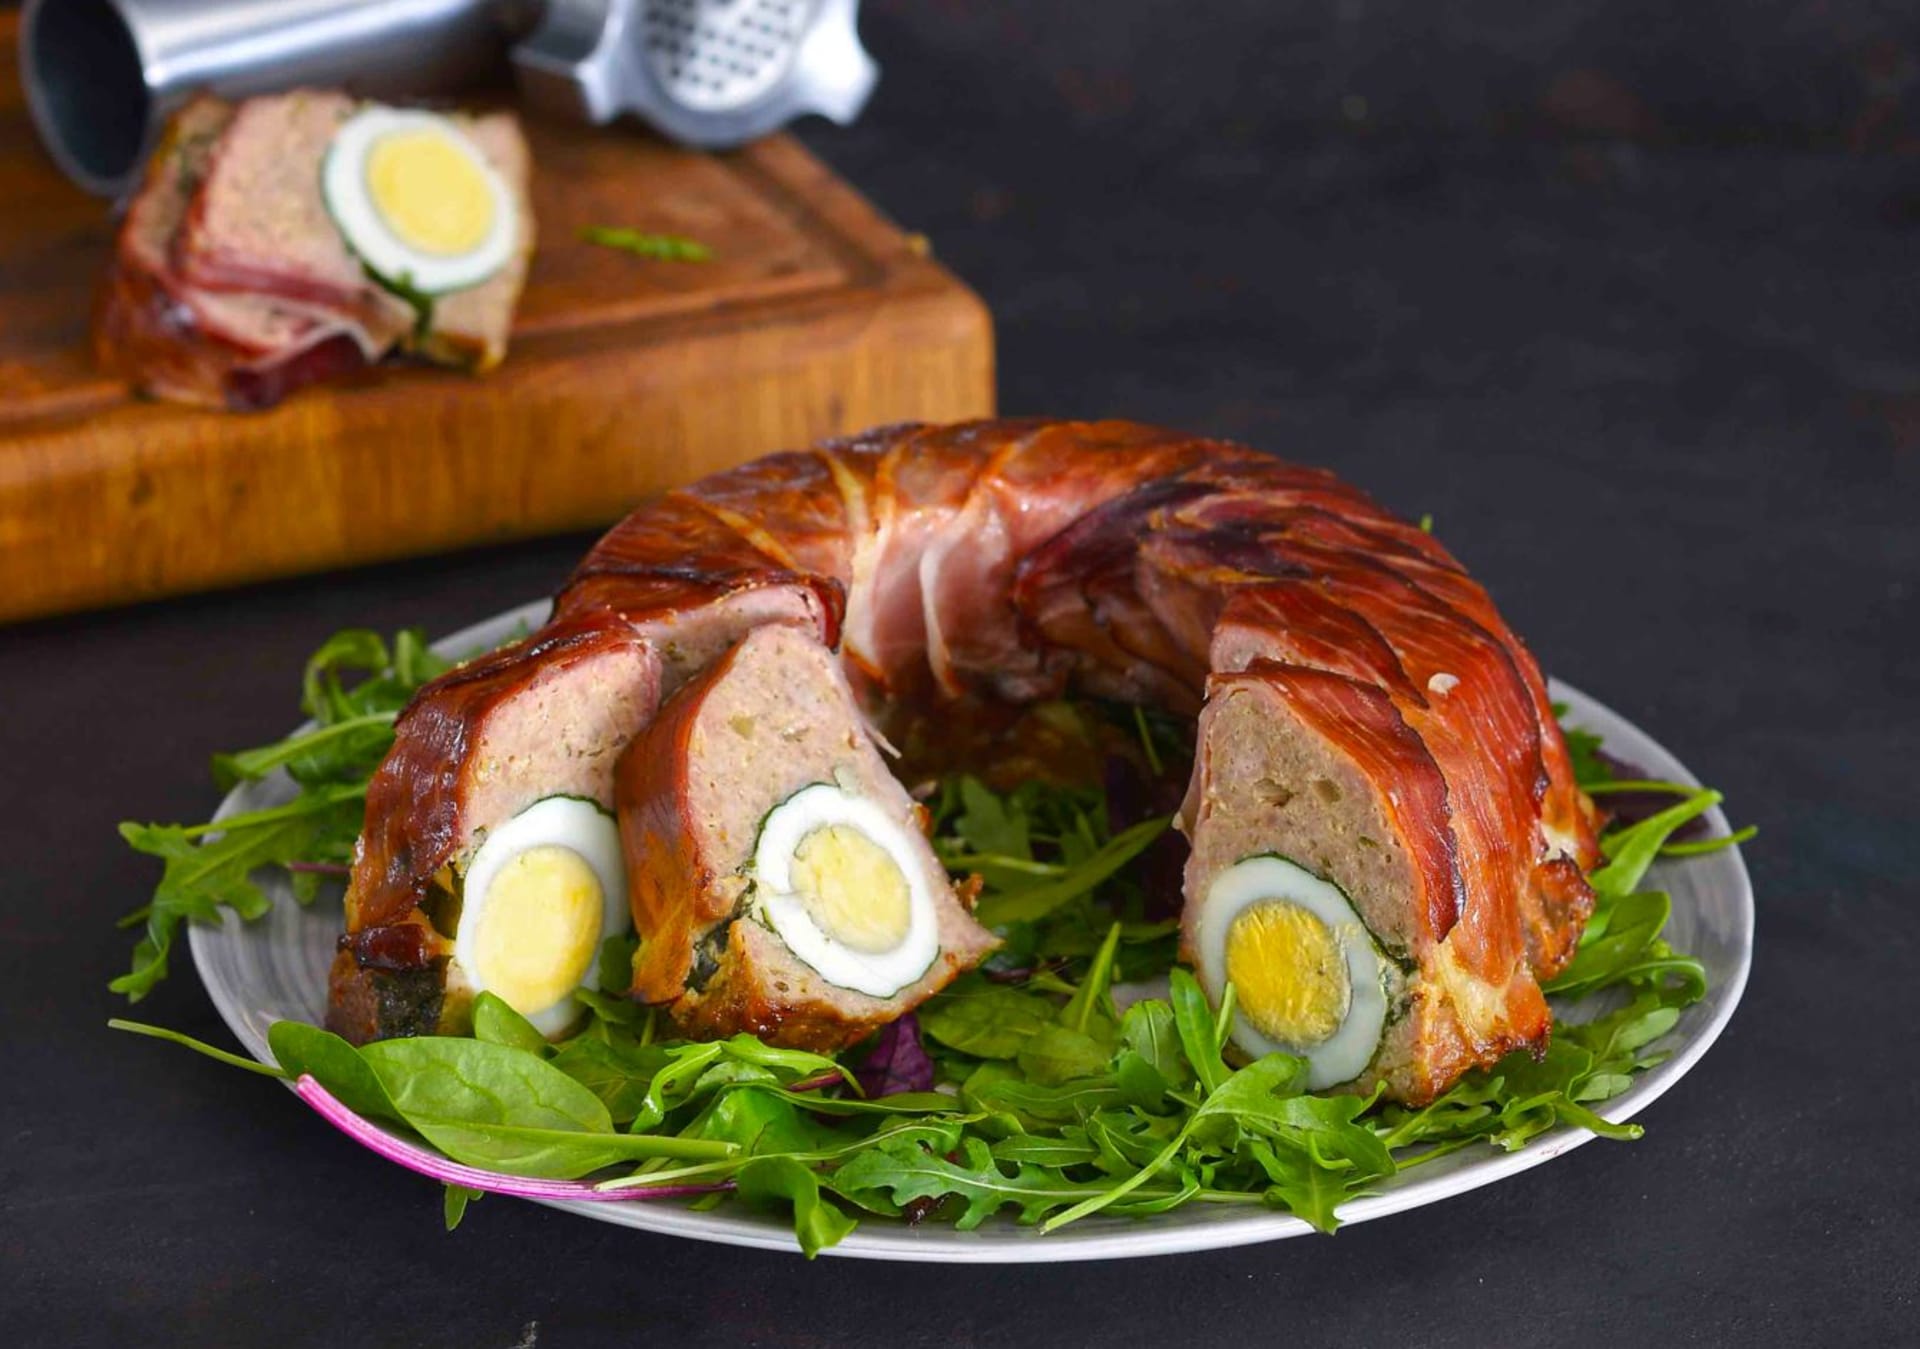 Salted meat garland with boiled egg